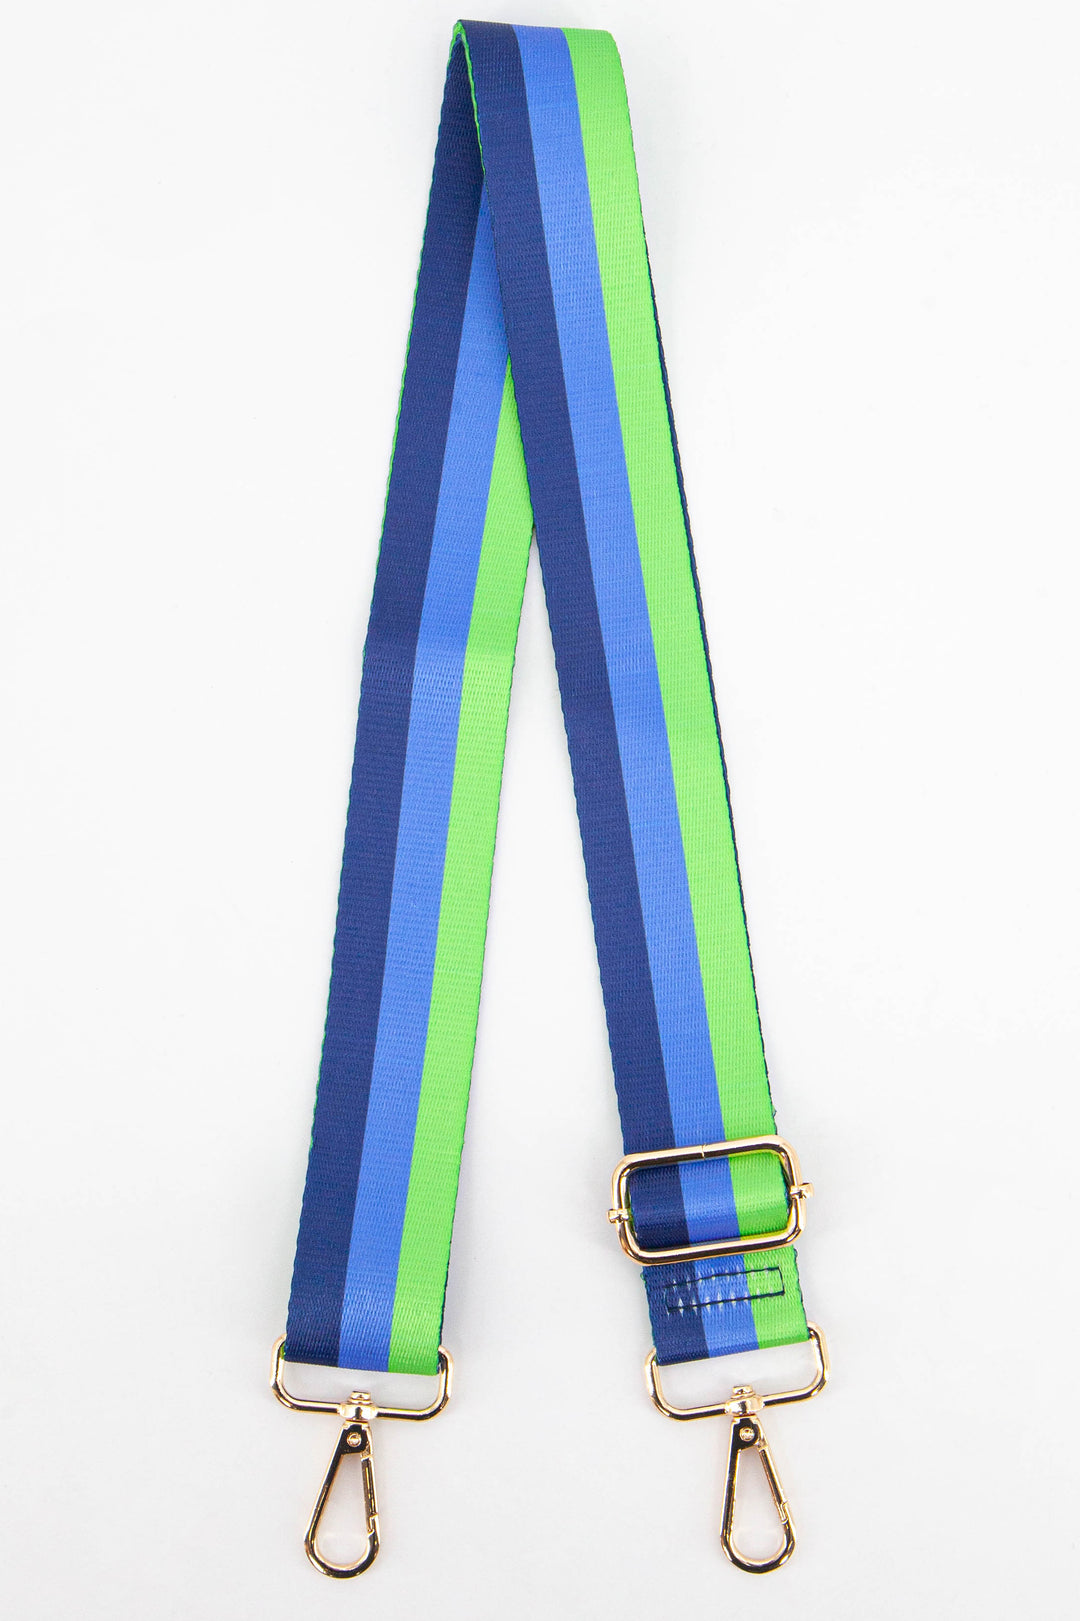 clip on bag strap with a pattern of three colour block stripes in navy blue, light blue and lime green